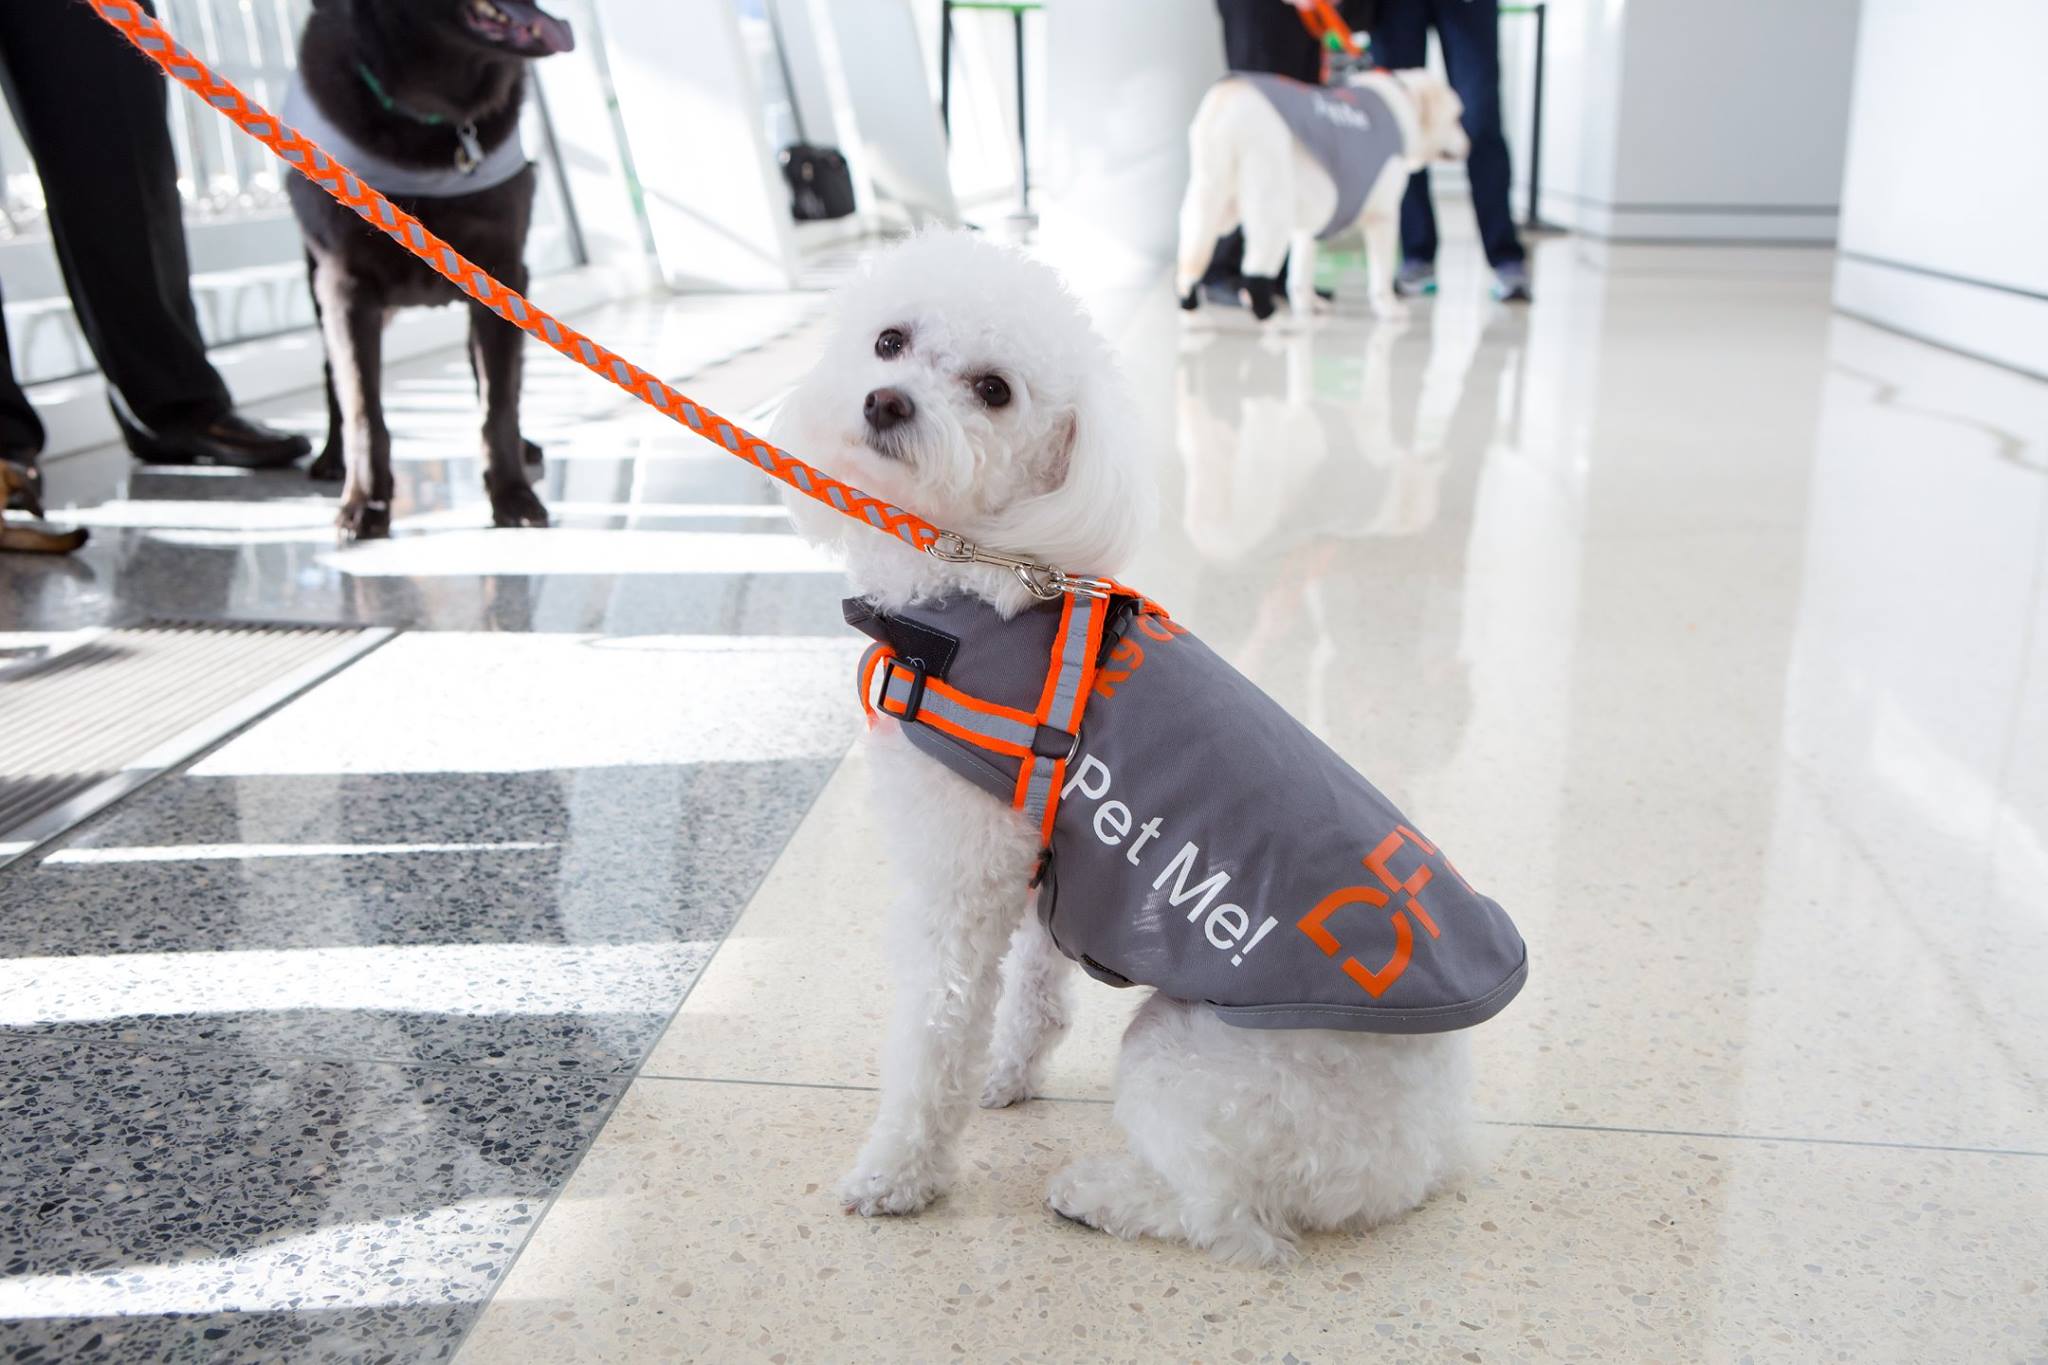 Airport Therapy Dog at Dallas Fort-Worth Airport | Get Healthy at DFW Airport - Vane Airport Magazine